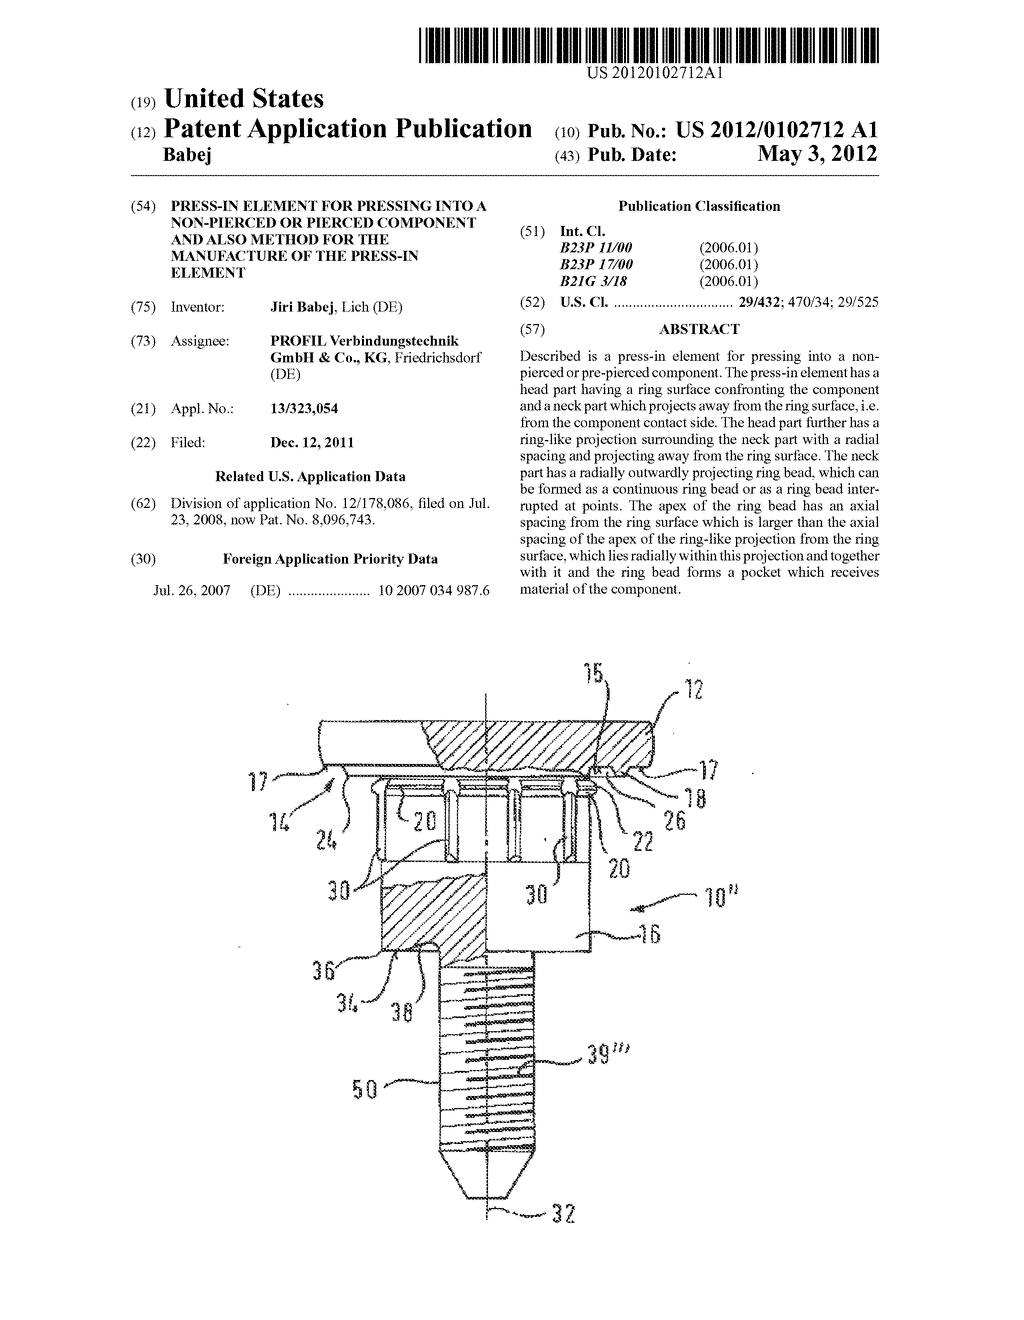 Press-in element for pressing into a non-pierced or pierced component and     also method for the manufacture of the press-in element - diagram, schematic, and image 01